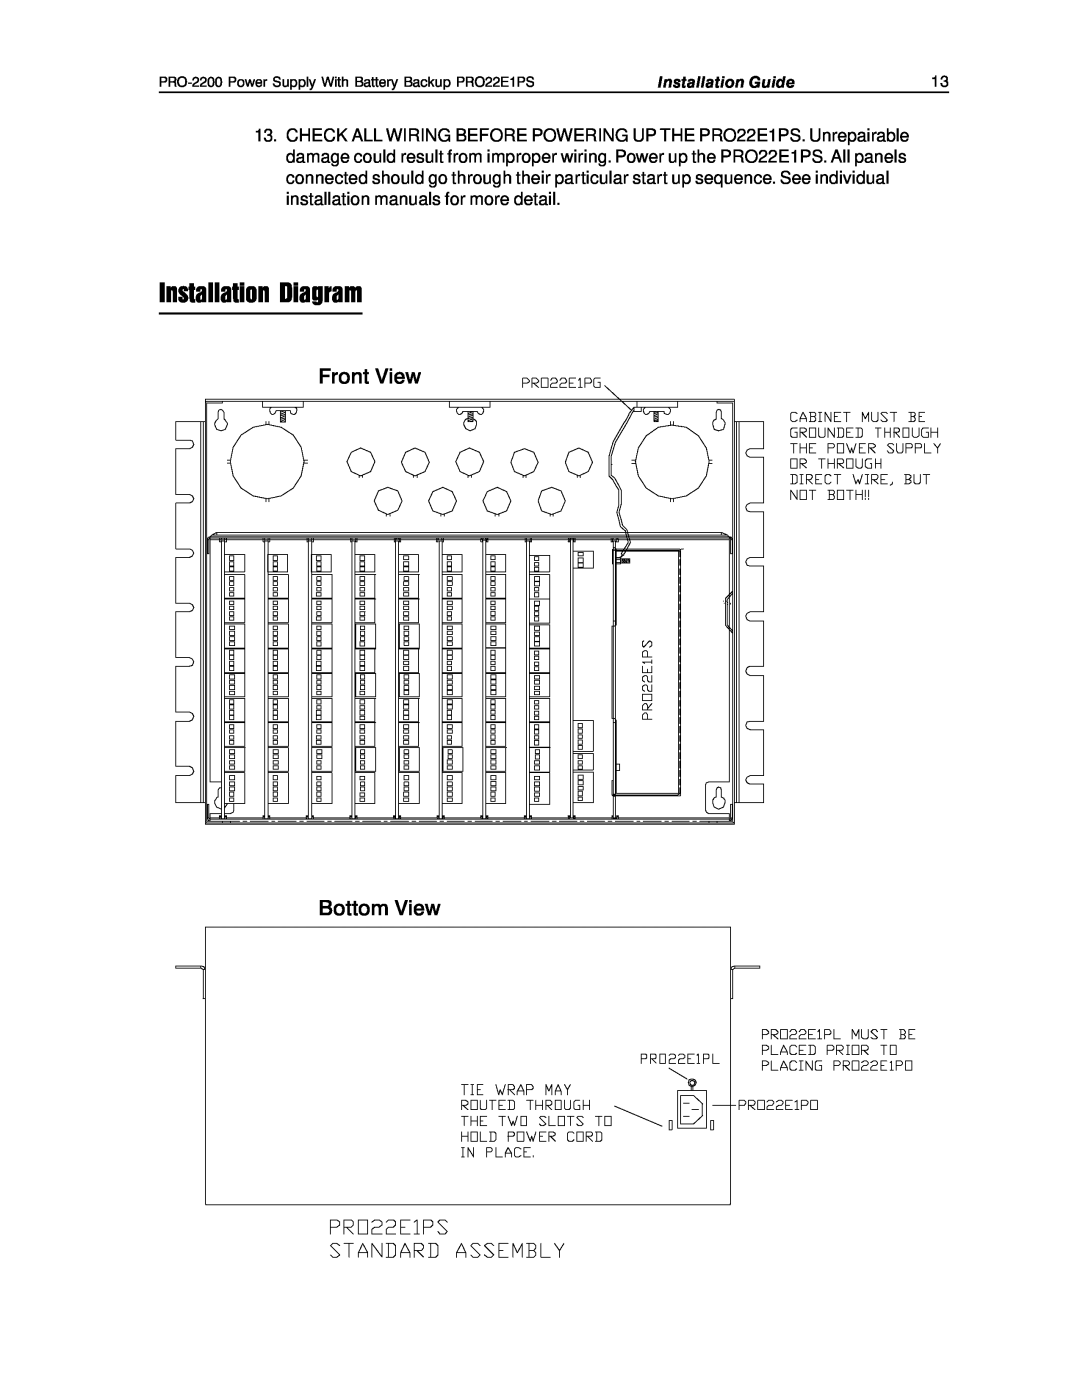 Honeywell PRO-2200 installation manual Installation Diagram, Front View Bottom View, Installation Guide 